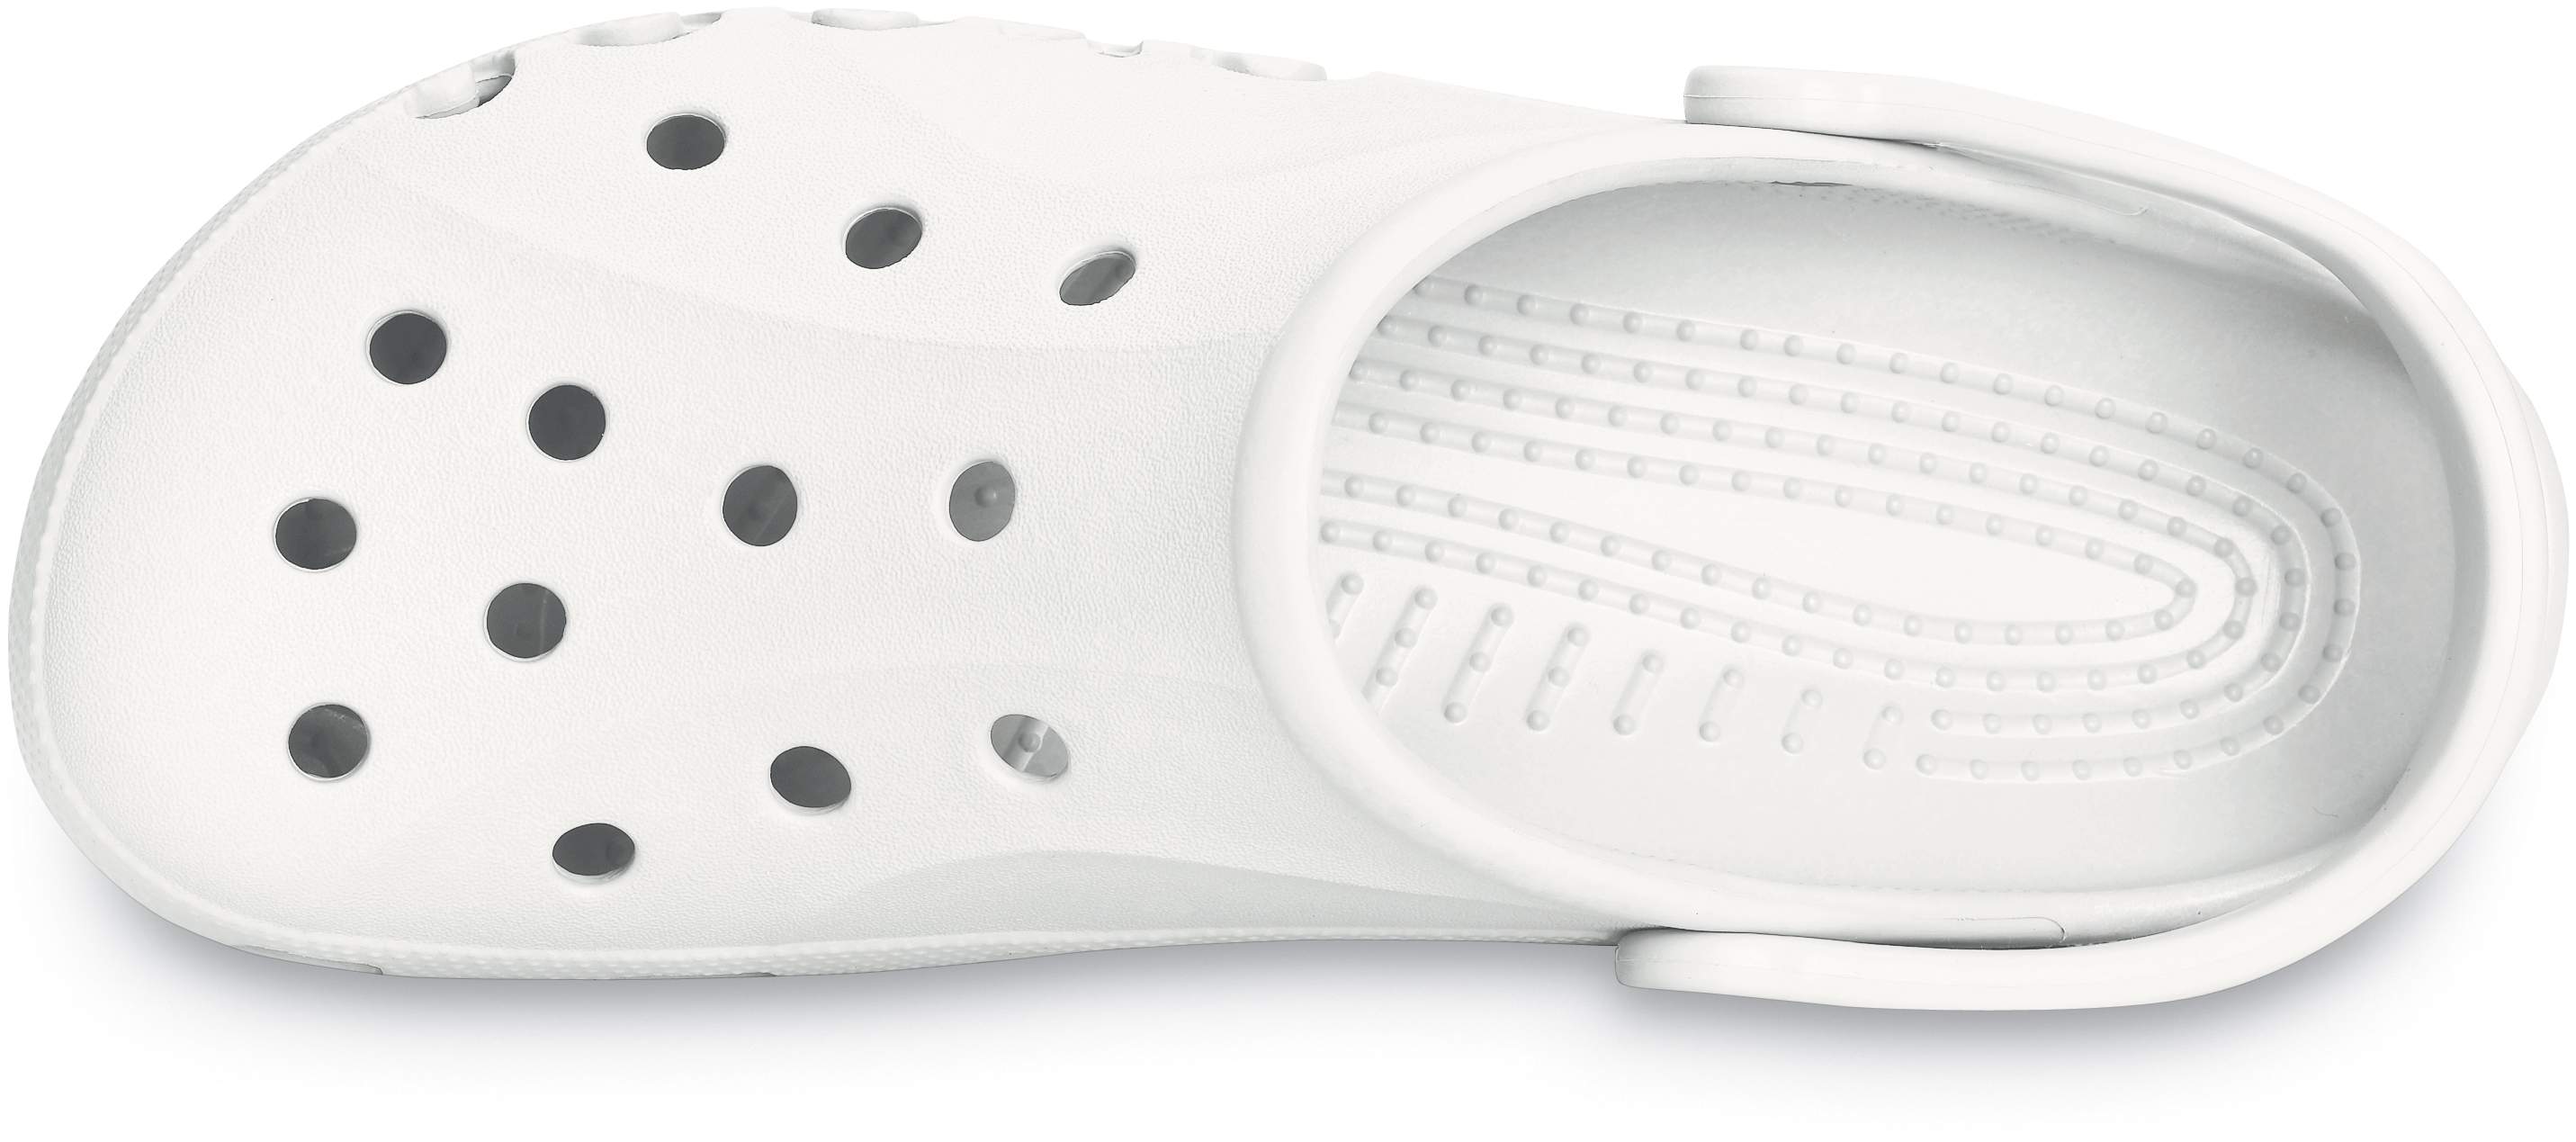 white crocs with fur womens